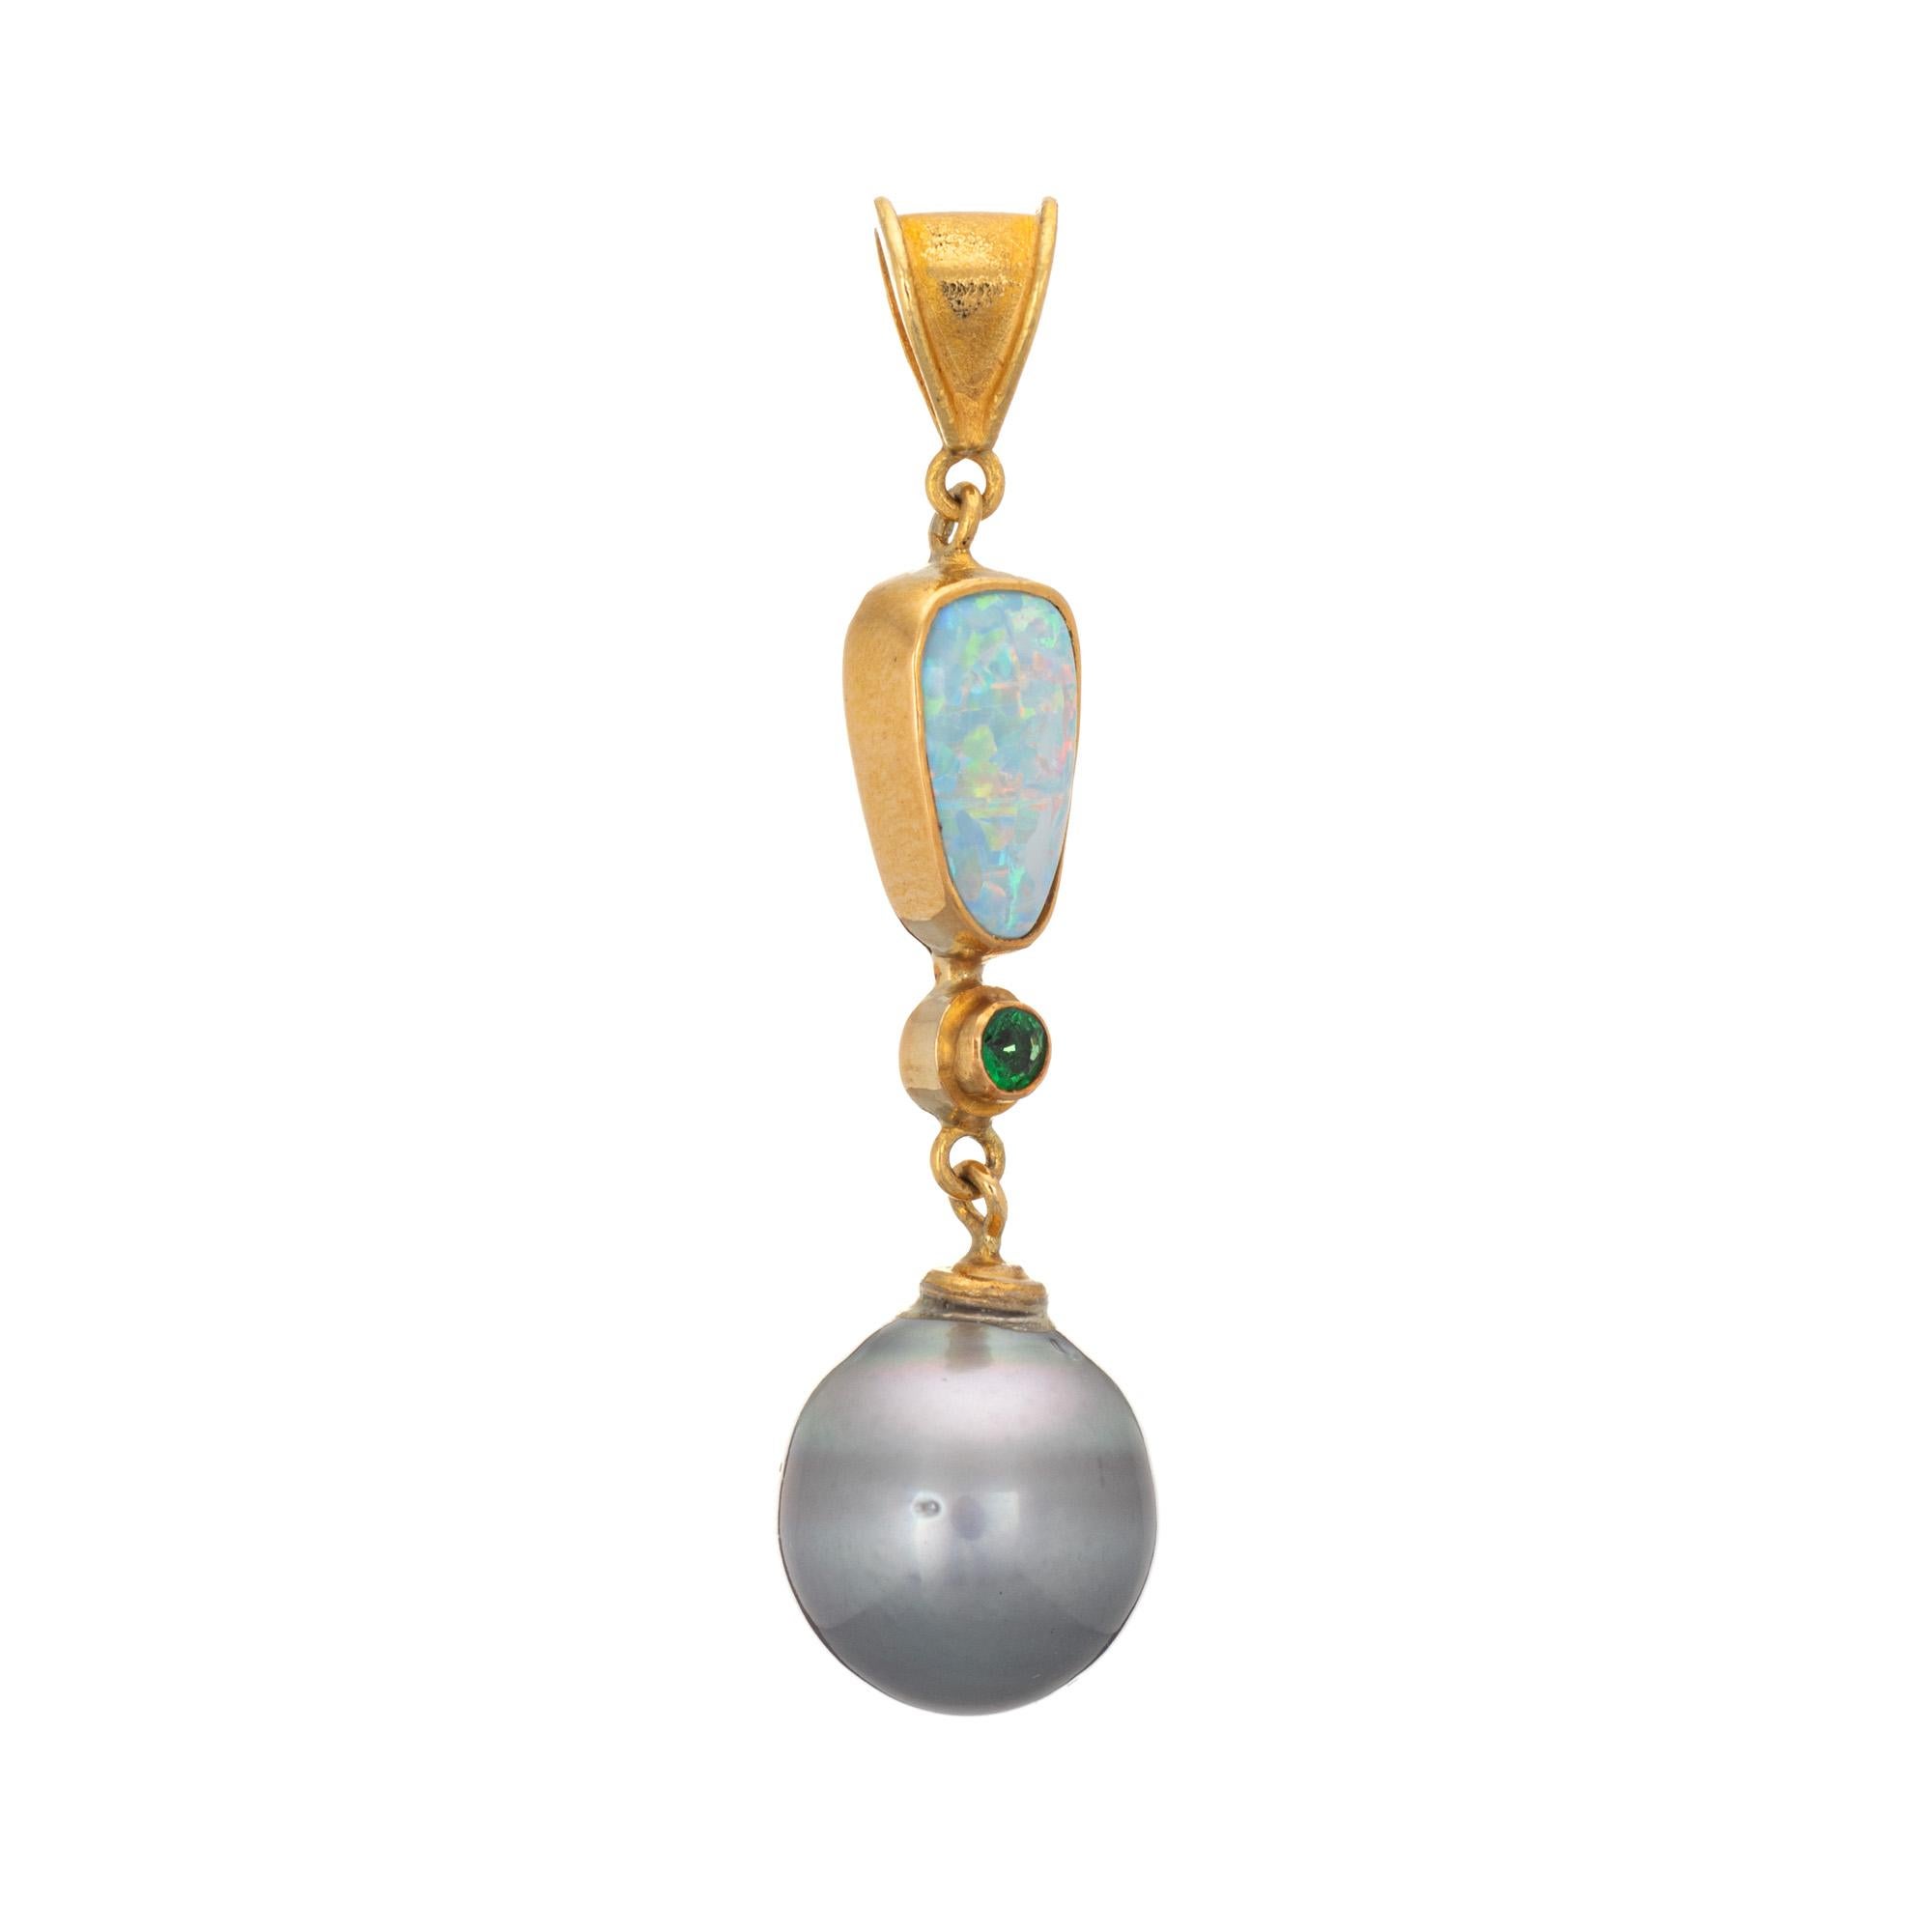 Finely detailed vintage opal, emerald & baroque pearl pendant crafted in high karat 22k yellow gold. 

The opal measures 10mm x 6mm, accented with an estimated 0.05 carat emerald. The grey baroque pearl measures 11mm. The opal is in excellent